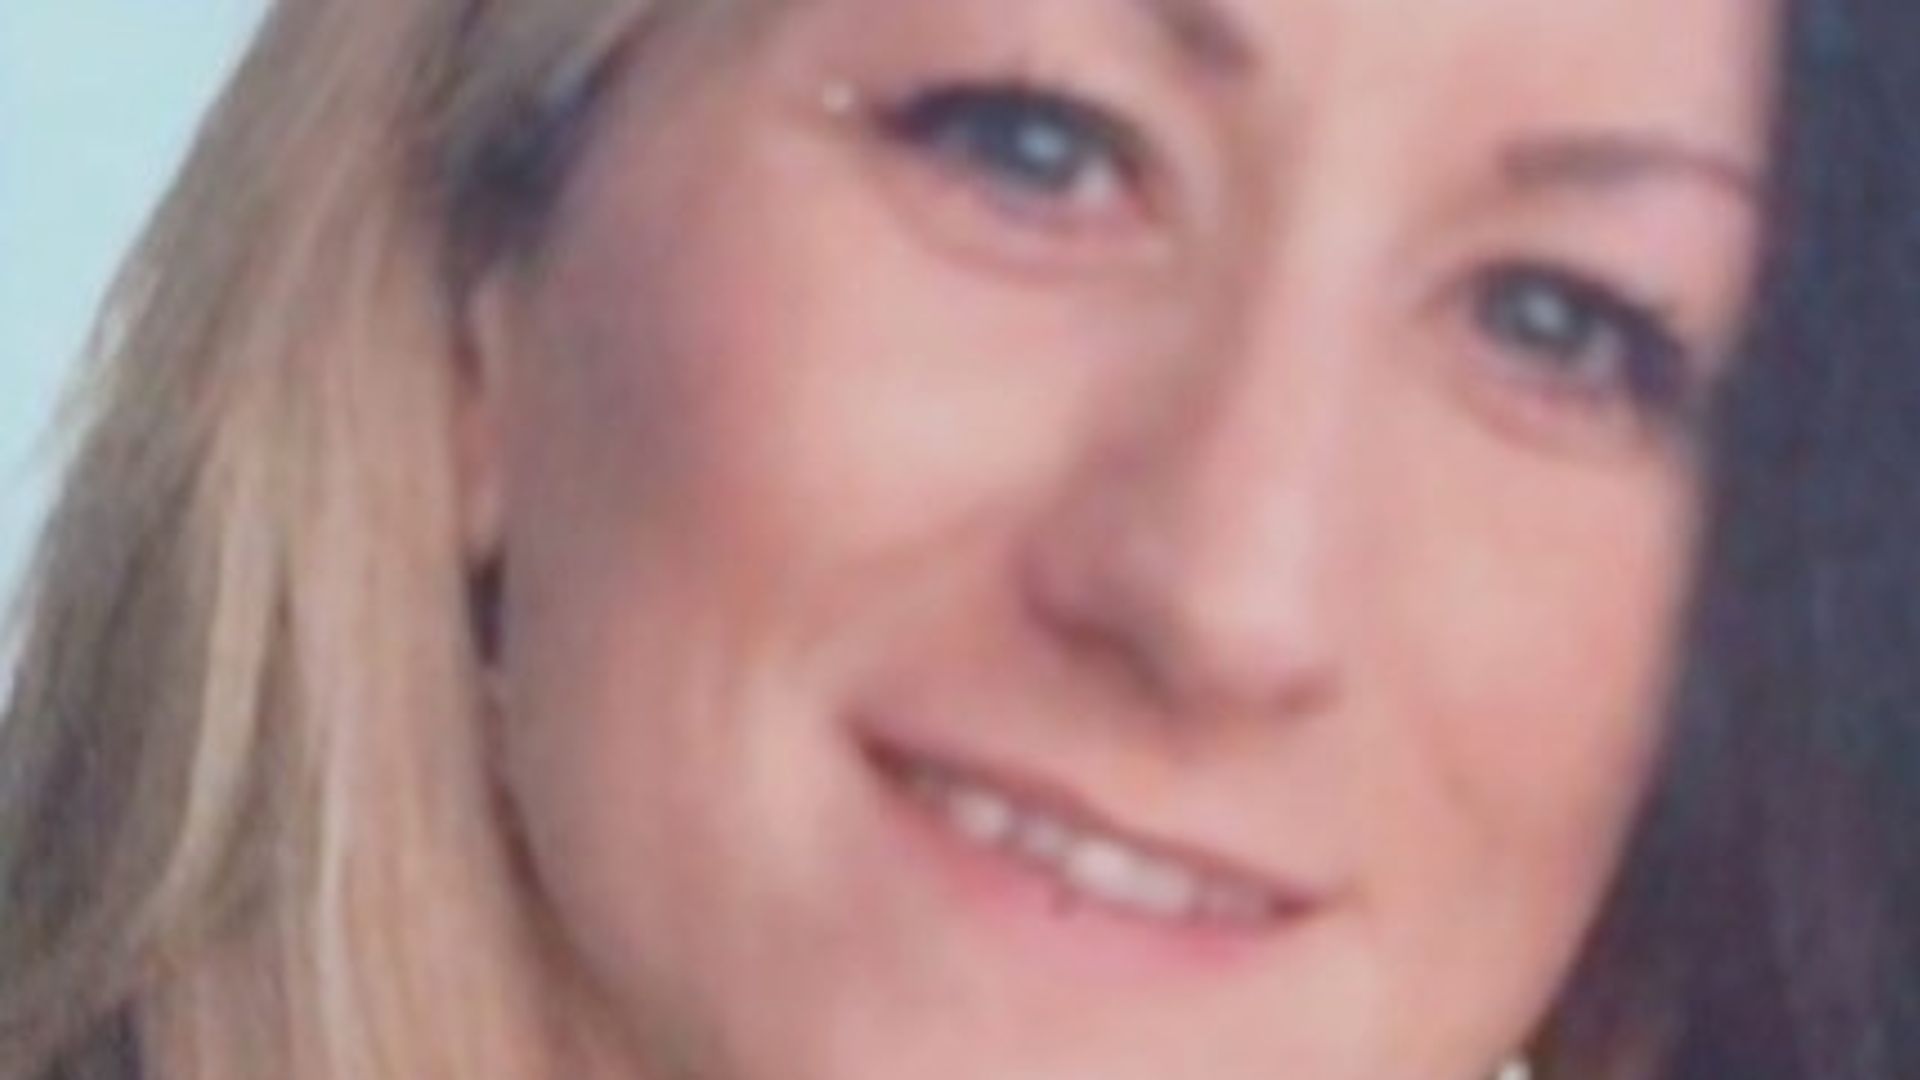 Human remains found in river believed to be of woman 'dismembered with power tools'